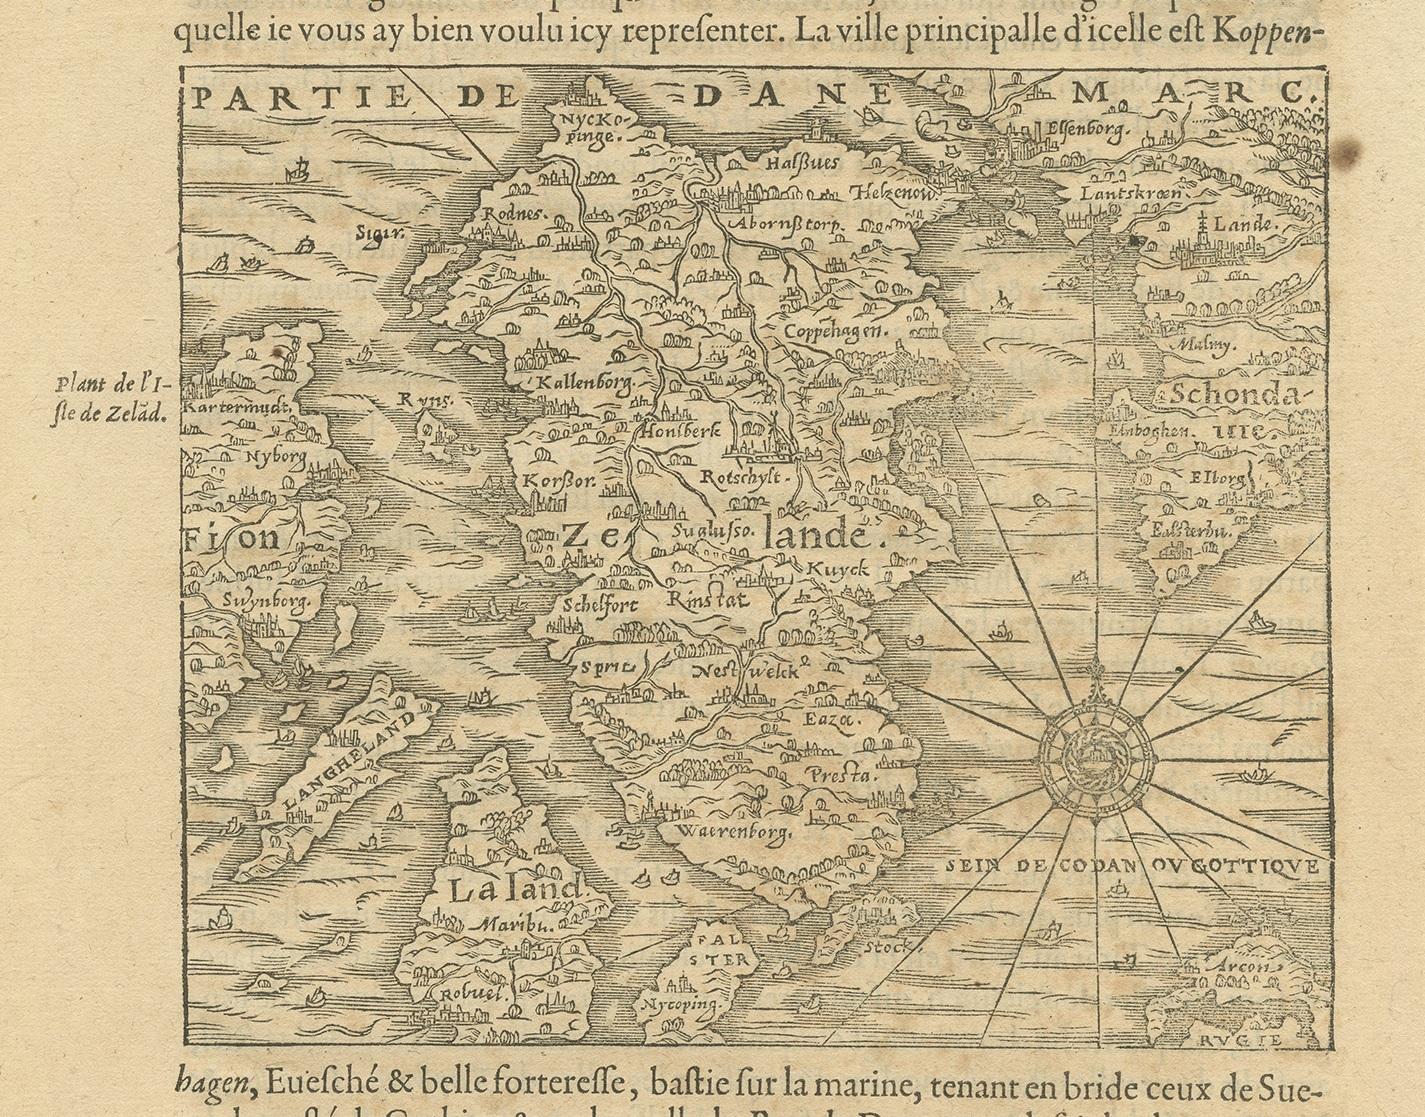 Antique map titled 'Partie de Danemarc'. Map of the island of Zealand, Denmark, including the city of Copenhagen. This map originates from 'Cosmographie Universelle' by André Thevet.